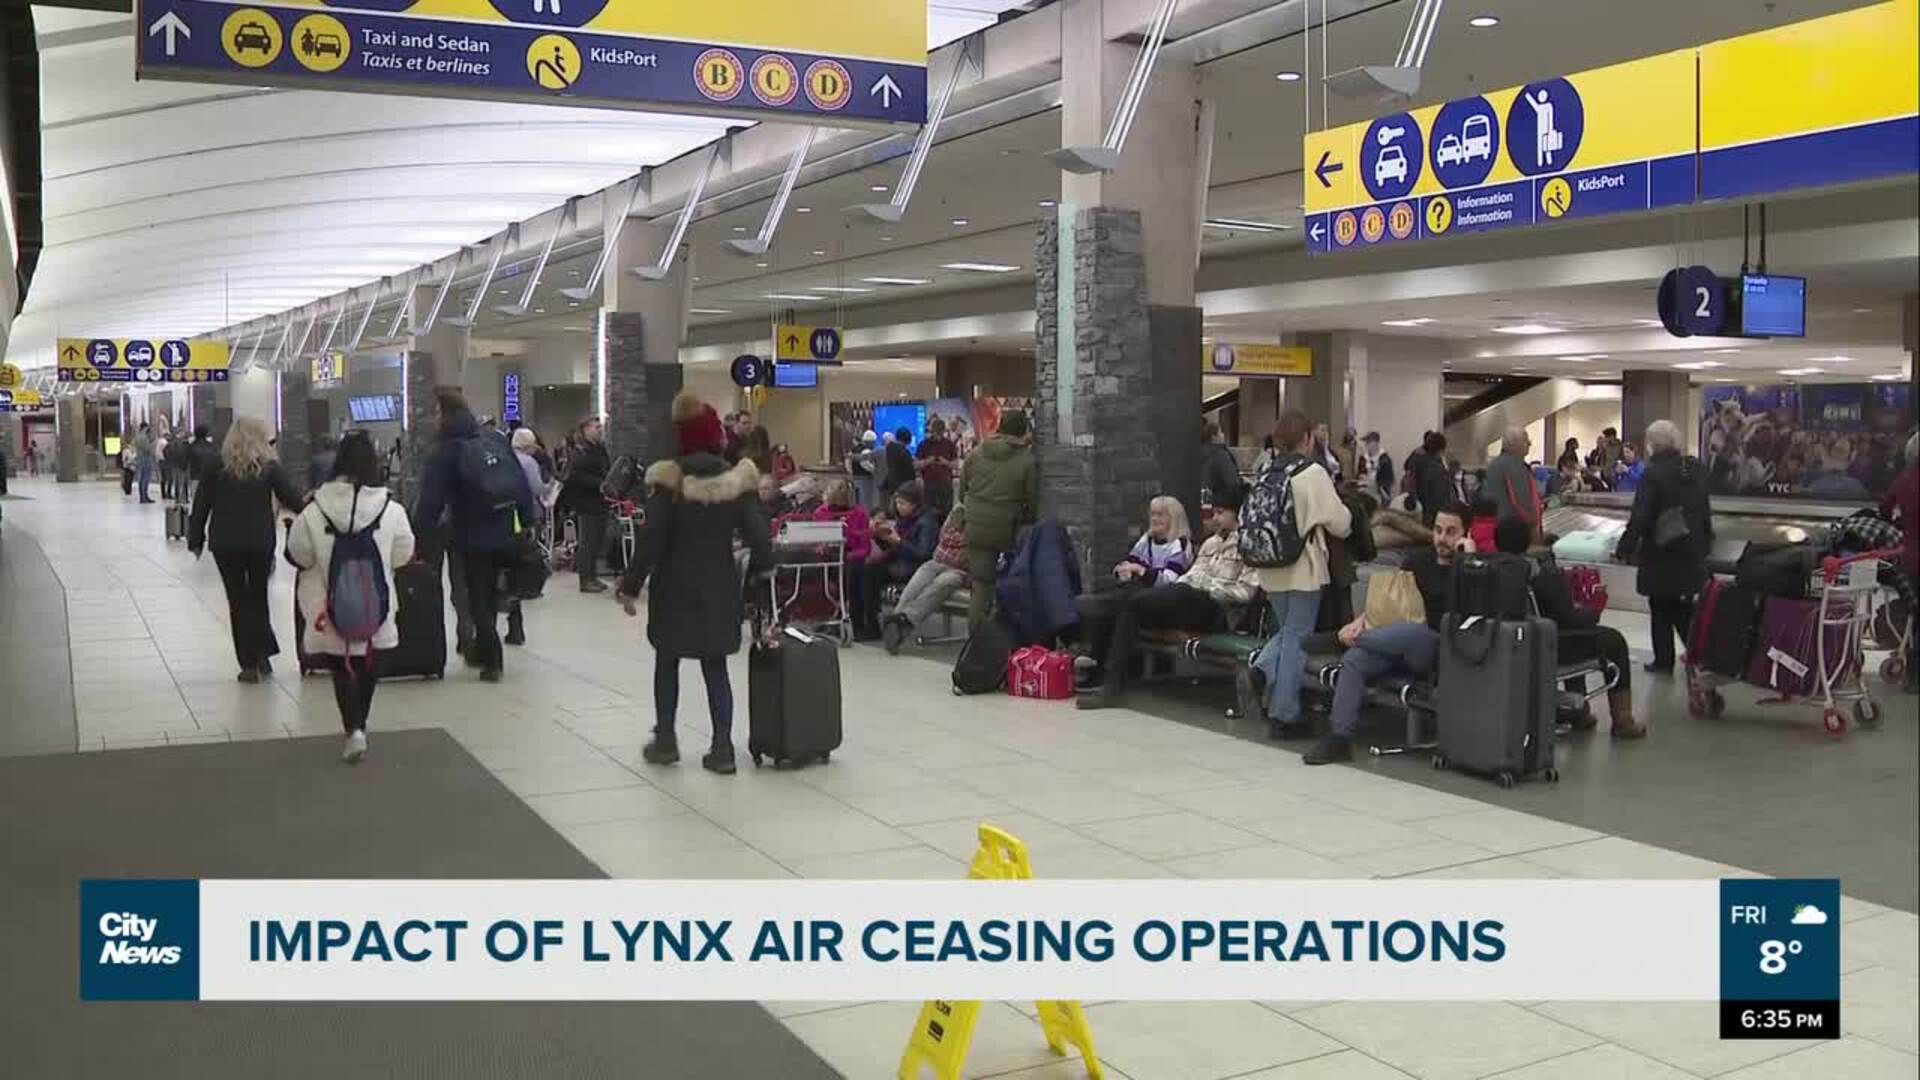 Impact of Lynx Air ceasing operations